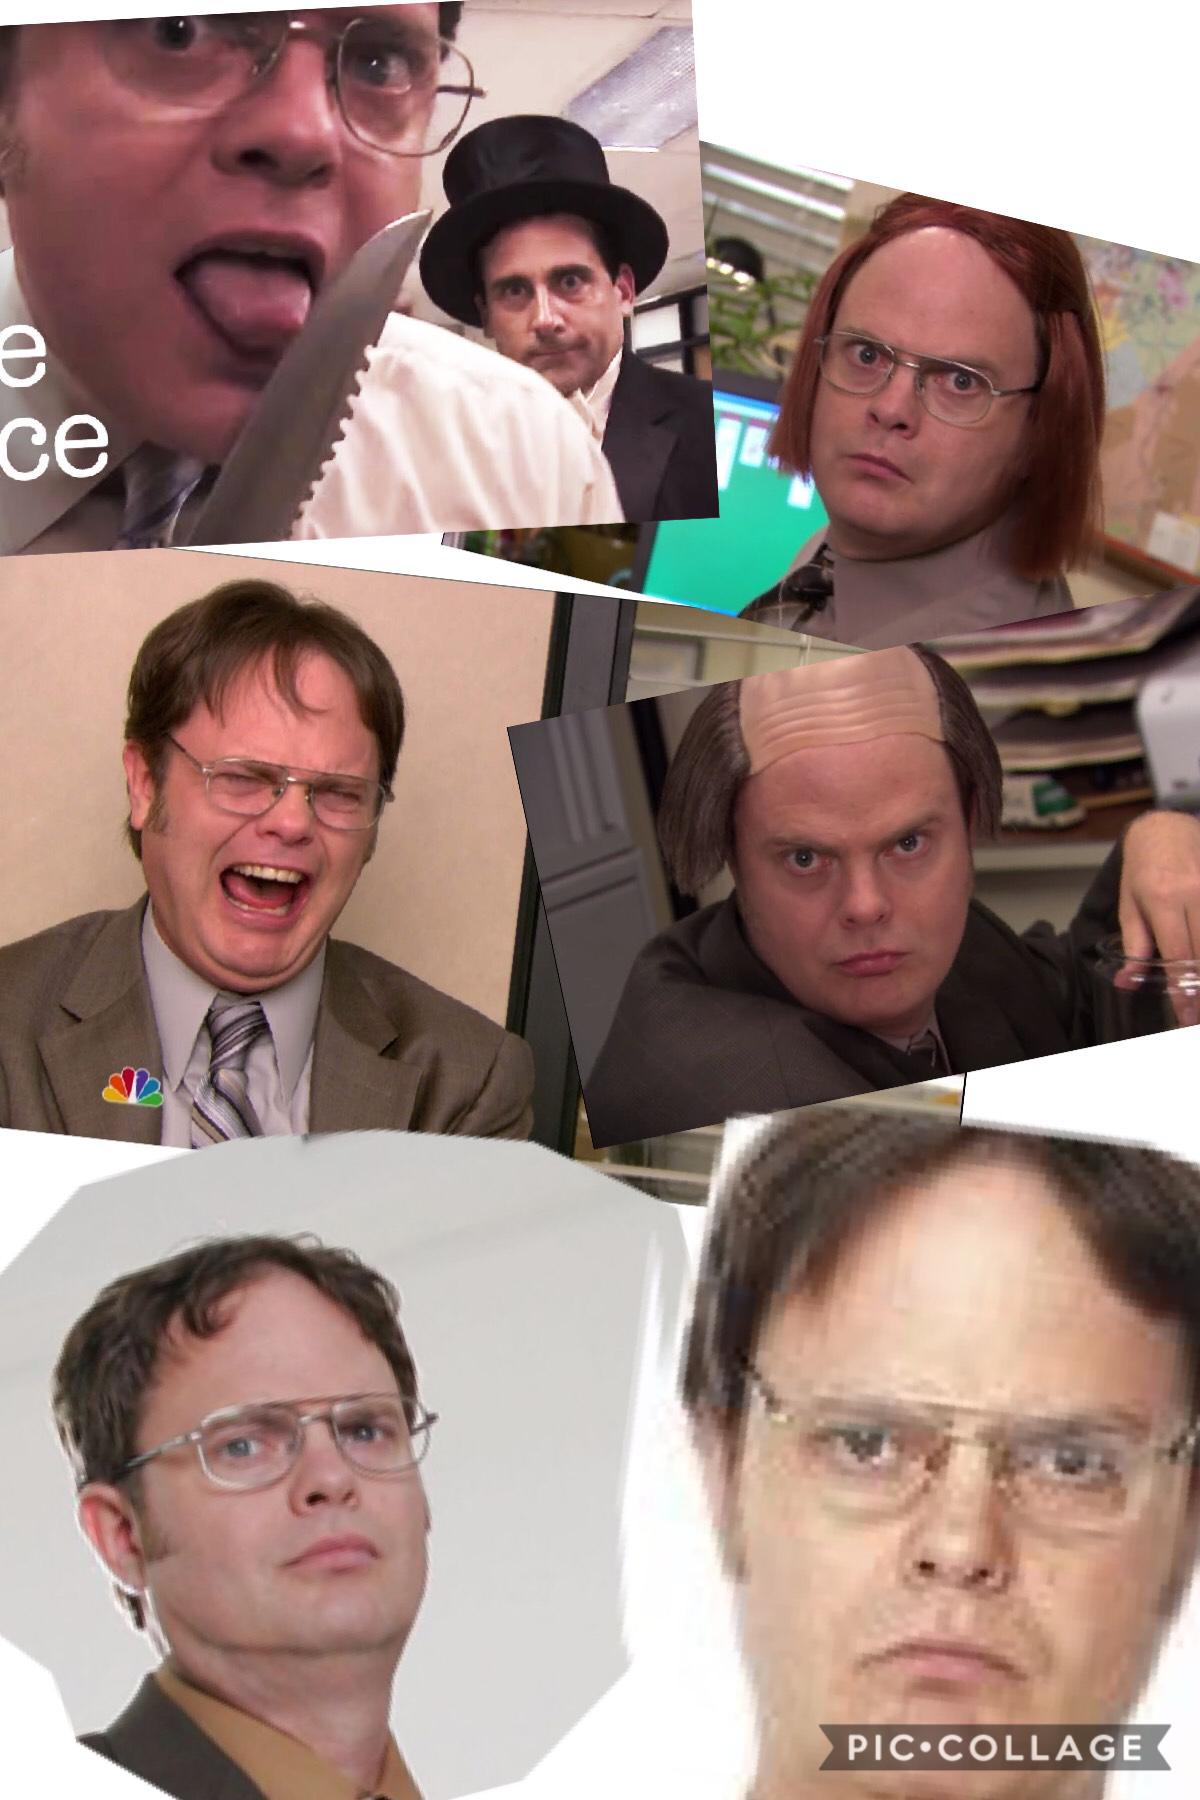 The Office is hands down the best show ever created and will always be my favorite. This lil collage is dedicated to my fav character, Dwight Kurt Schrute III. Love ya Dwight ❤️😂